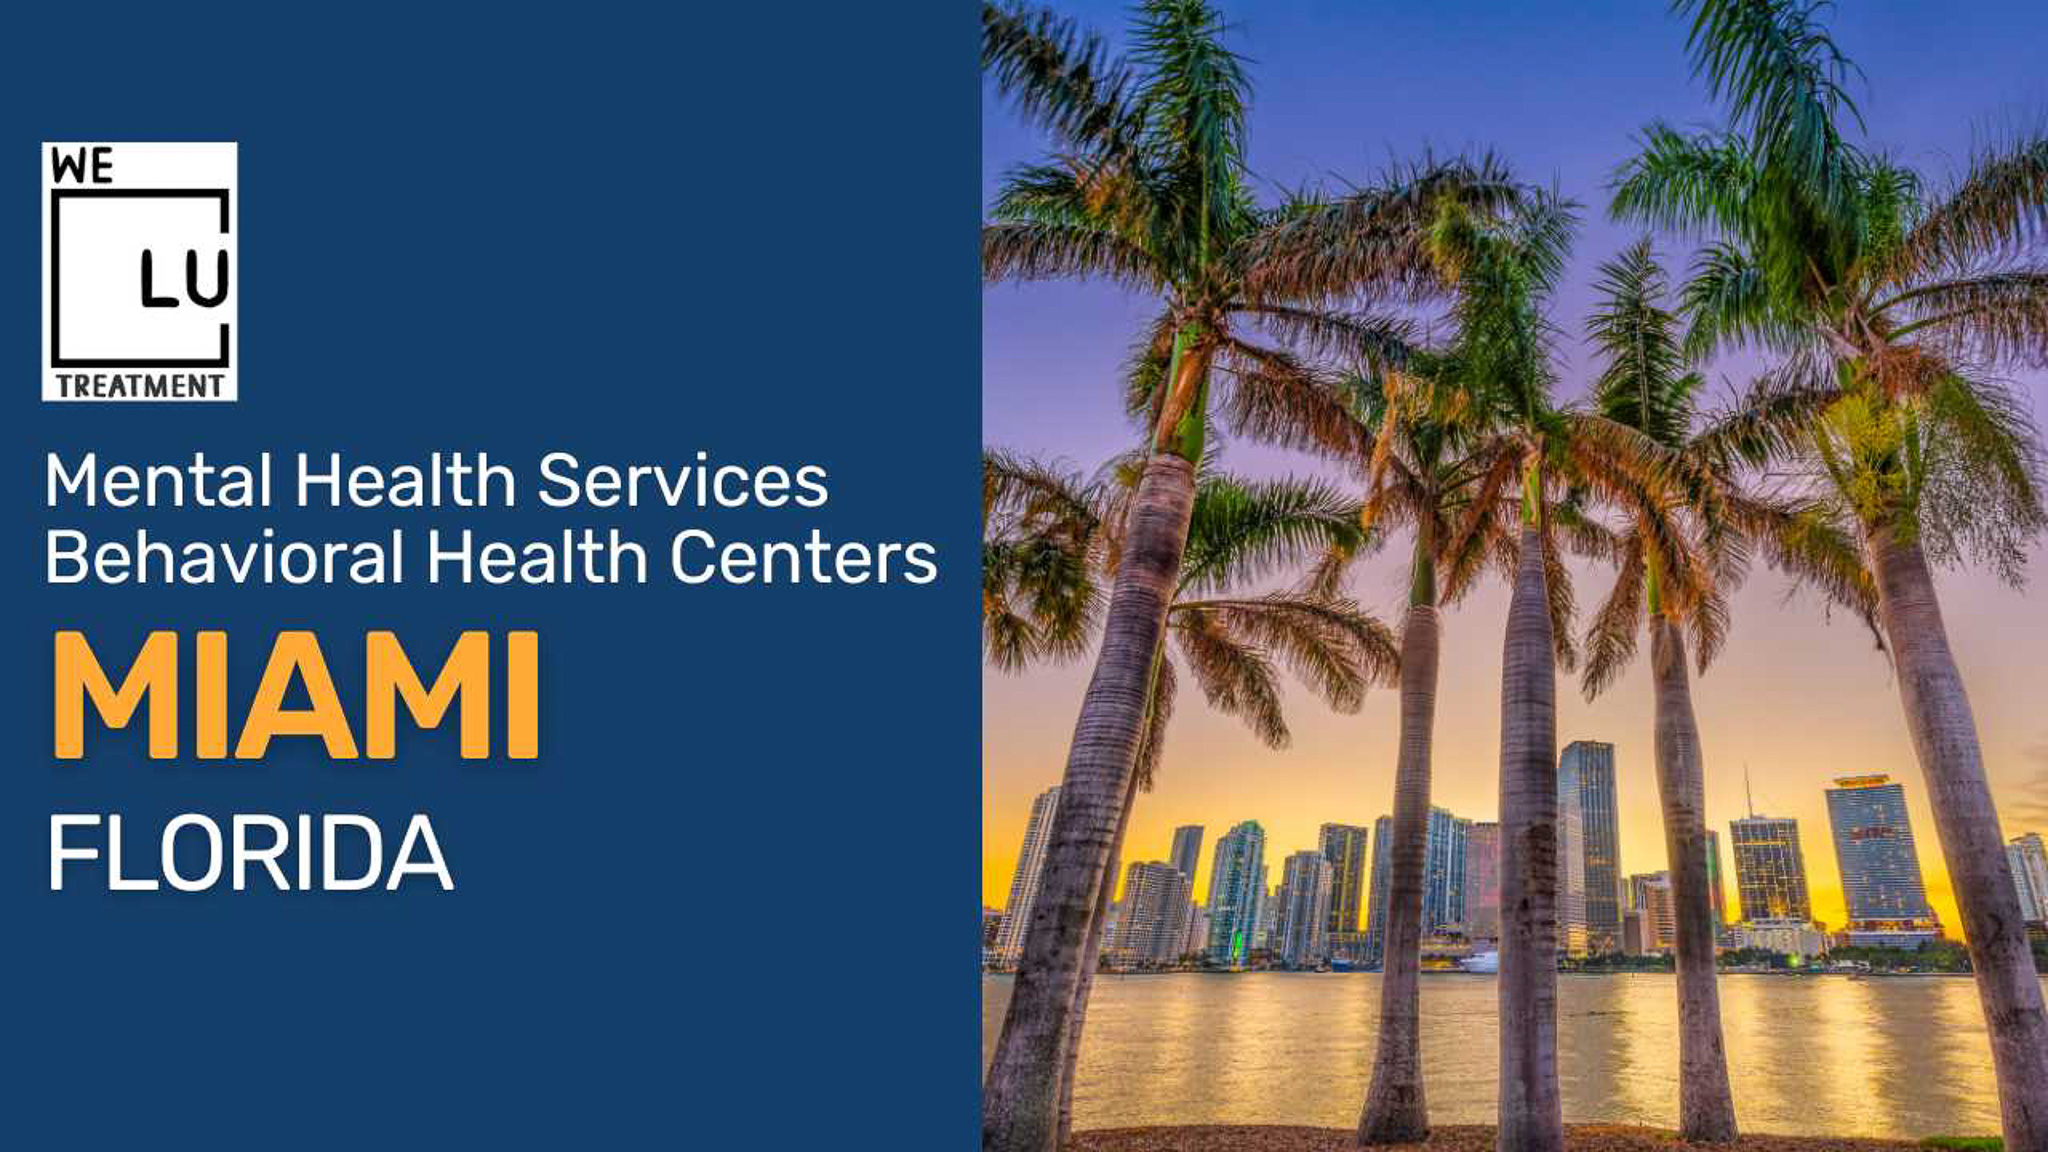 Miami FL (MH) We Level Up treatment center for drug and alcohol rehab detox and mental health services - Image 1